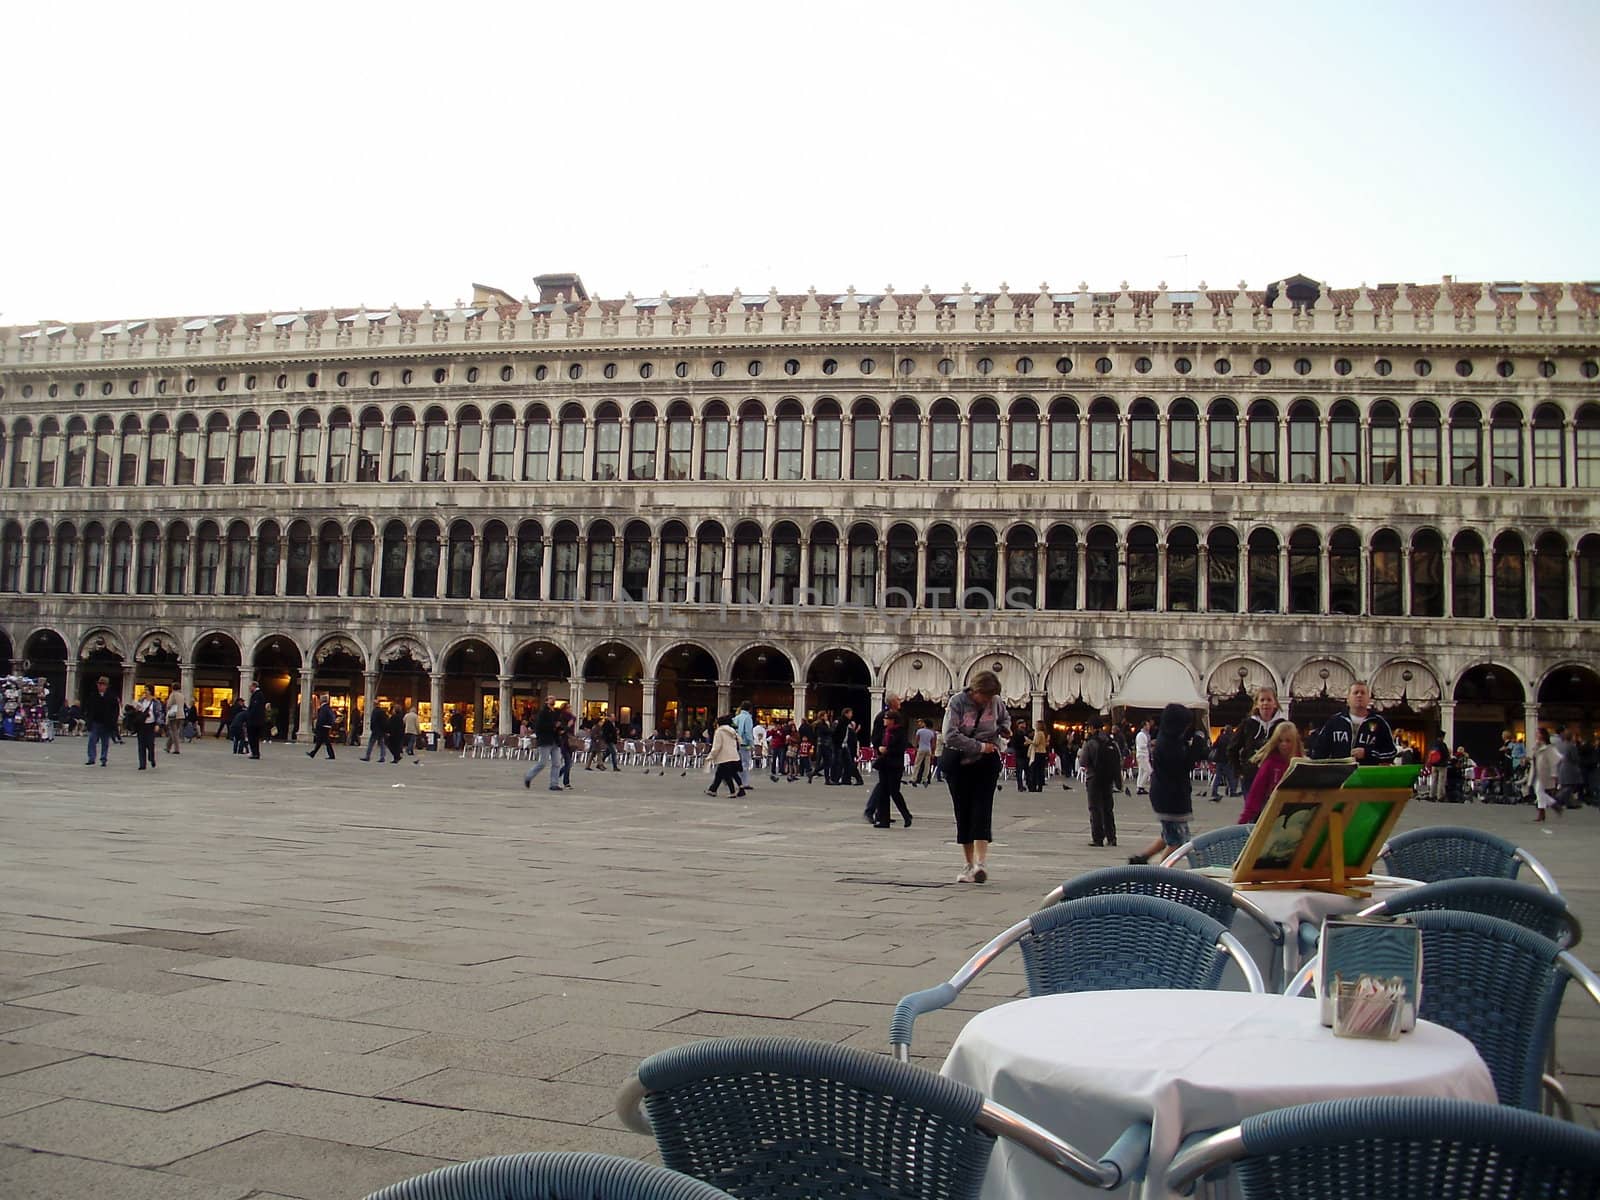 St. Mark's Square, also known as Piazza San Marco in Venice, Italy.